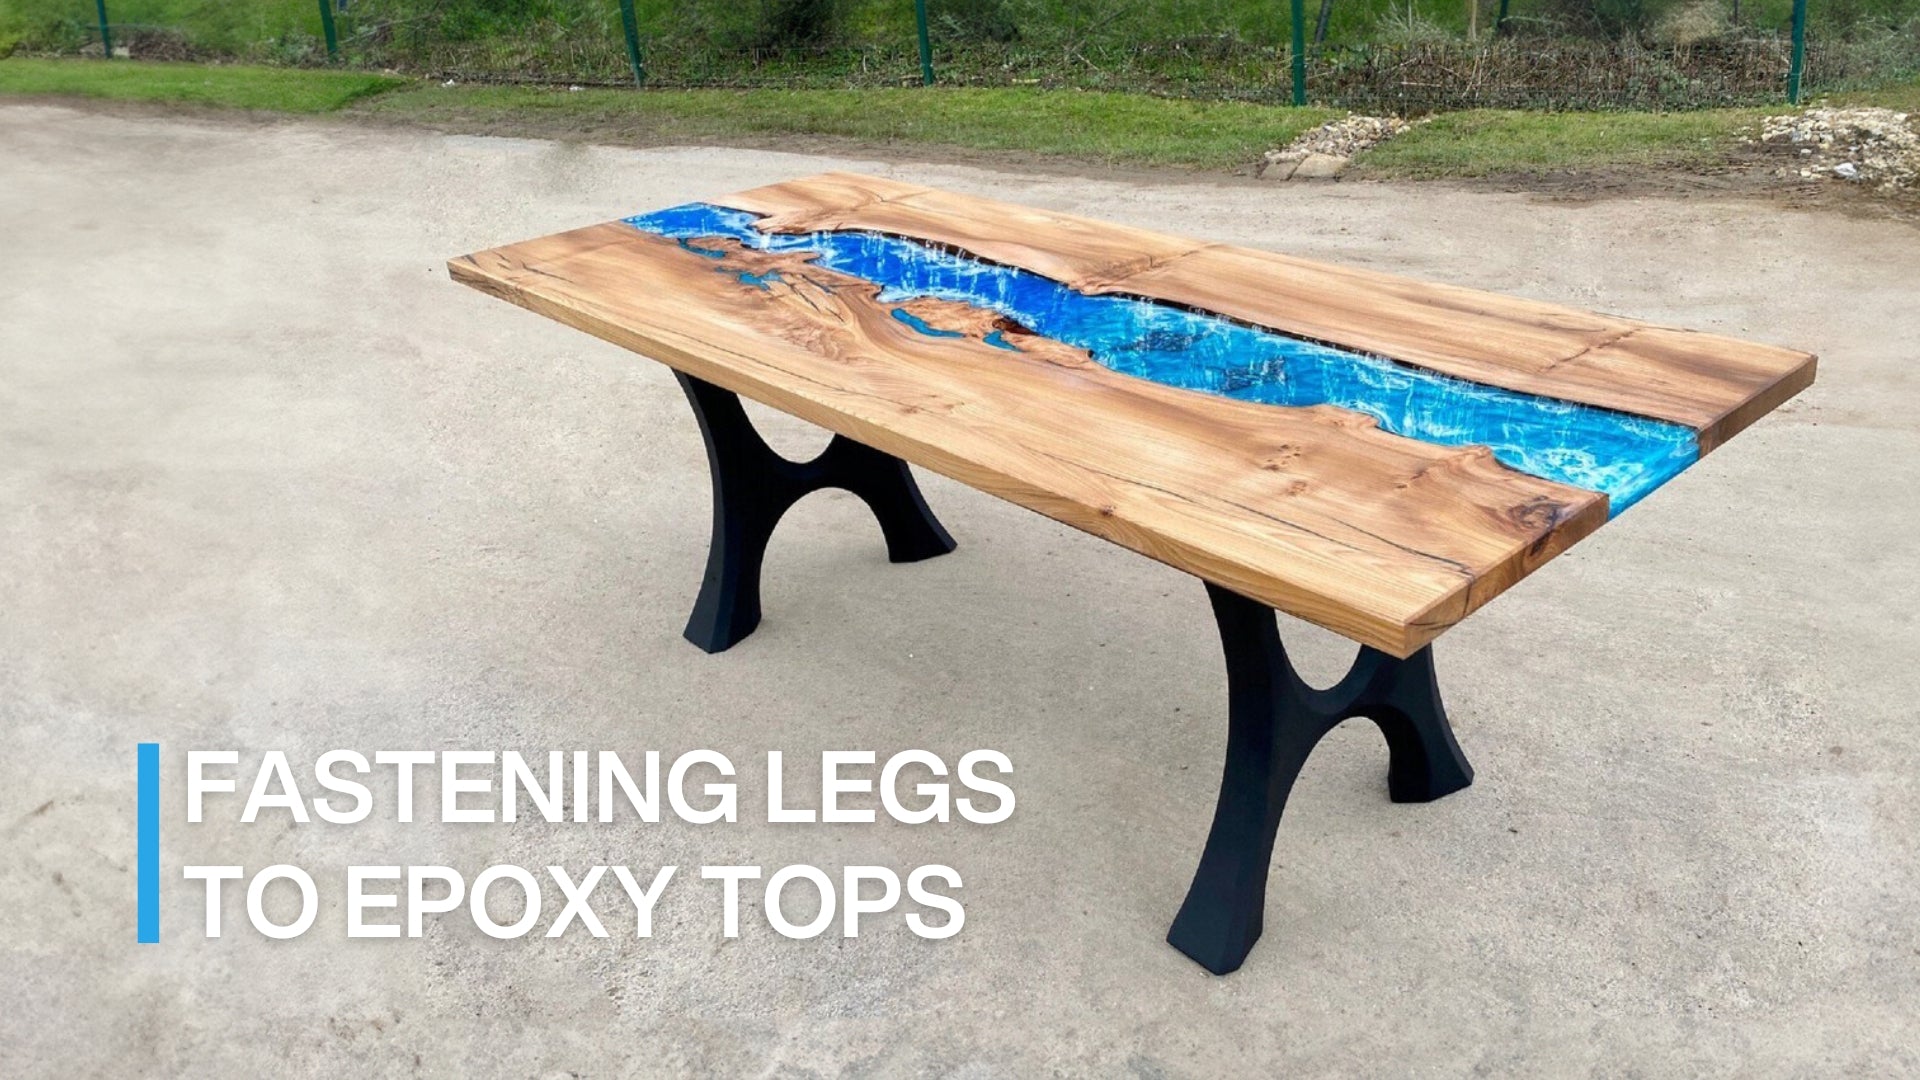 Epoxy Table top, Coating & Building Table tops